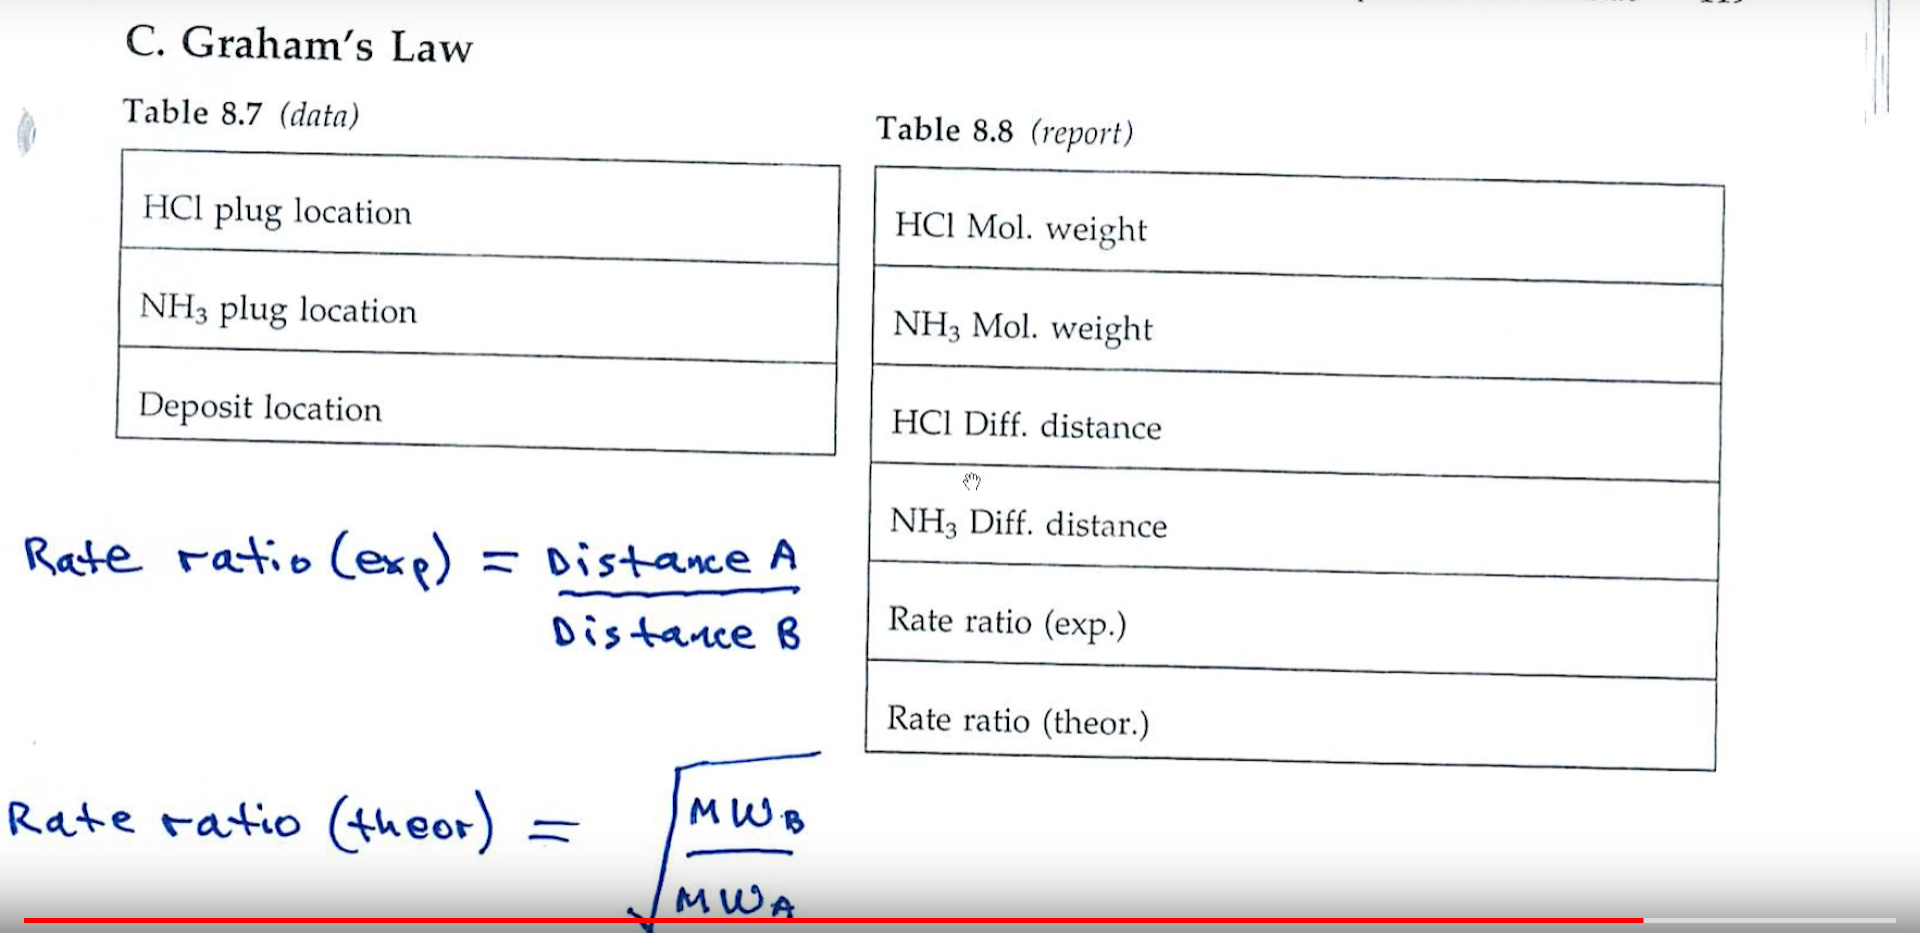 C. Graham's Law
Table 8.7 (data)
Table 8.8 (report)
HCl plug location
NH3 plug location
Deposit location
HCI Mol. weight
NH3 Mol. weight
HCI Diff. distance
NH3 Diff. distance
Rate rato (exę) - Distaxe A
Distaxe 8 Rate ratio (exp.)
Rate ratio (theor.)
Rate ratio (teor*U»
